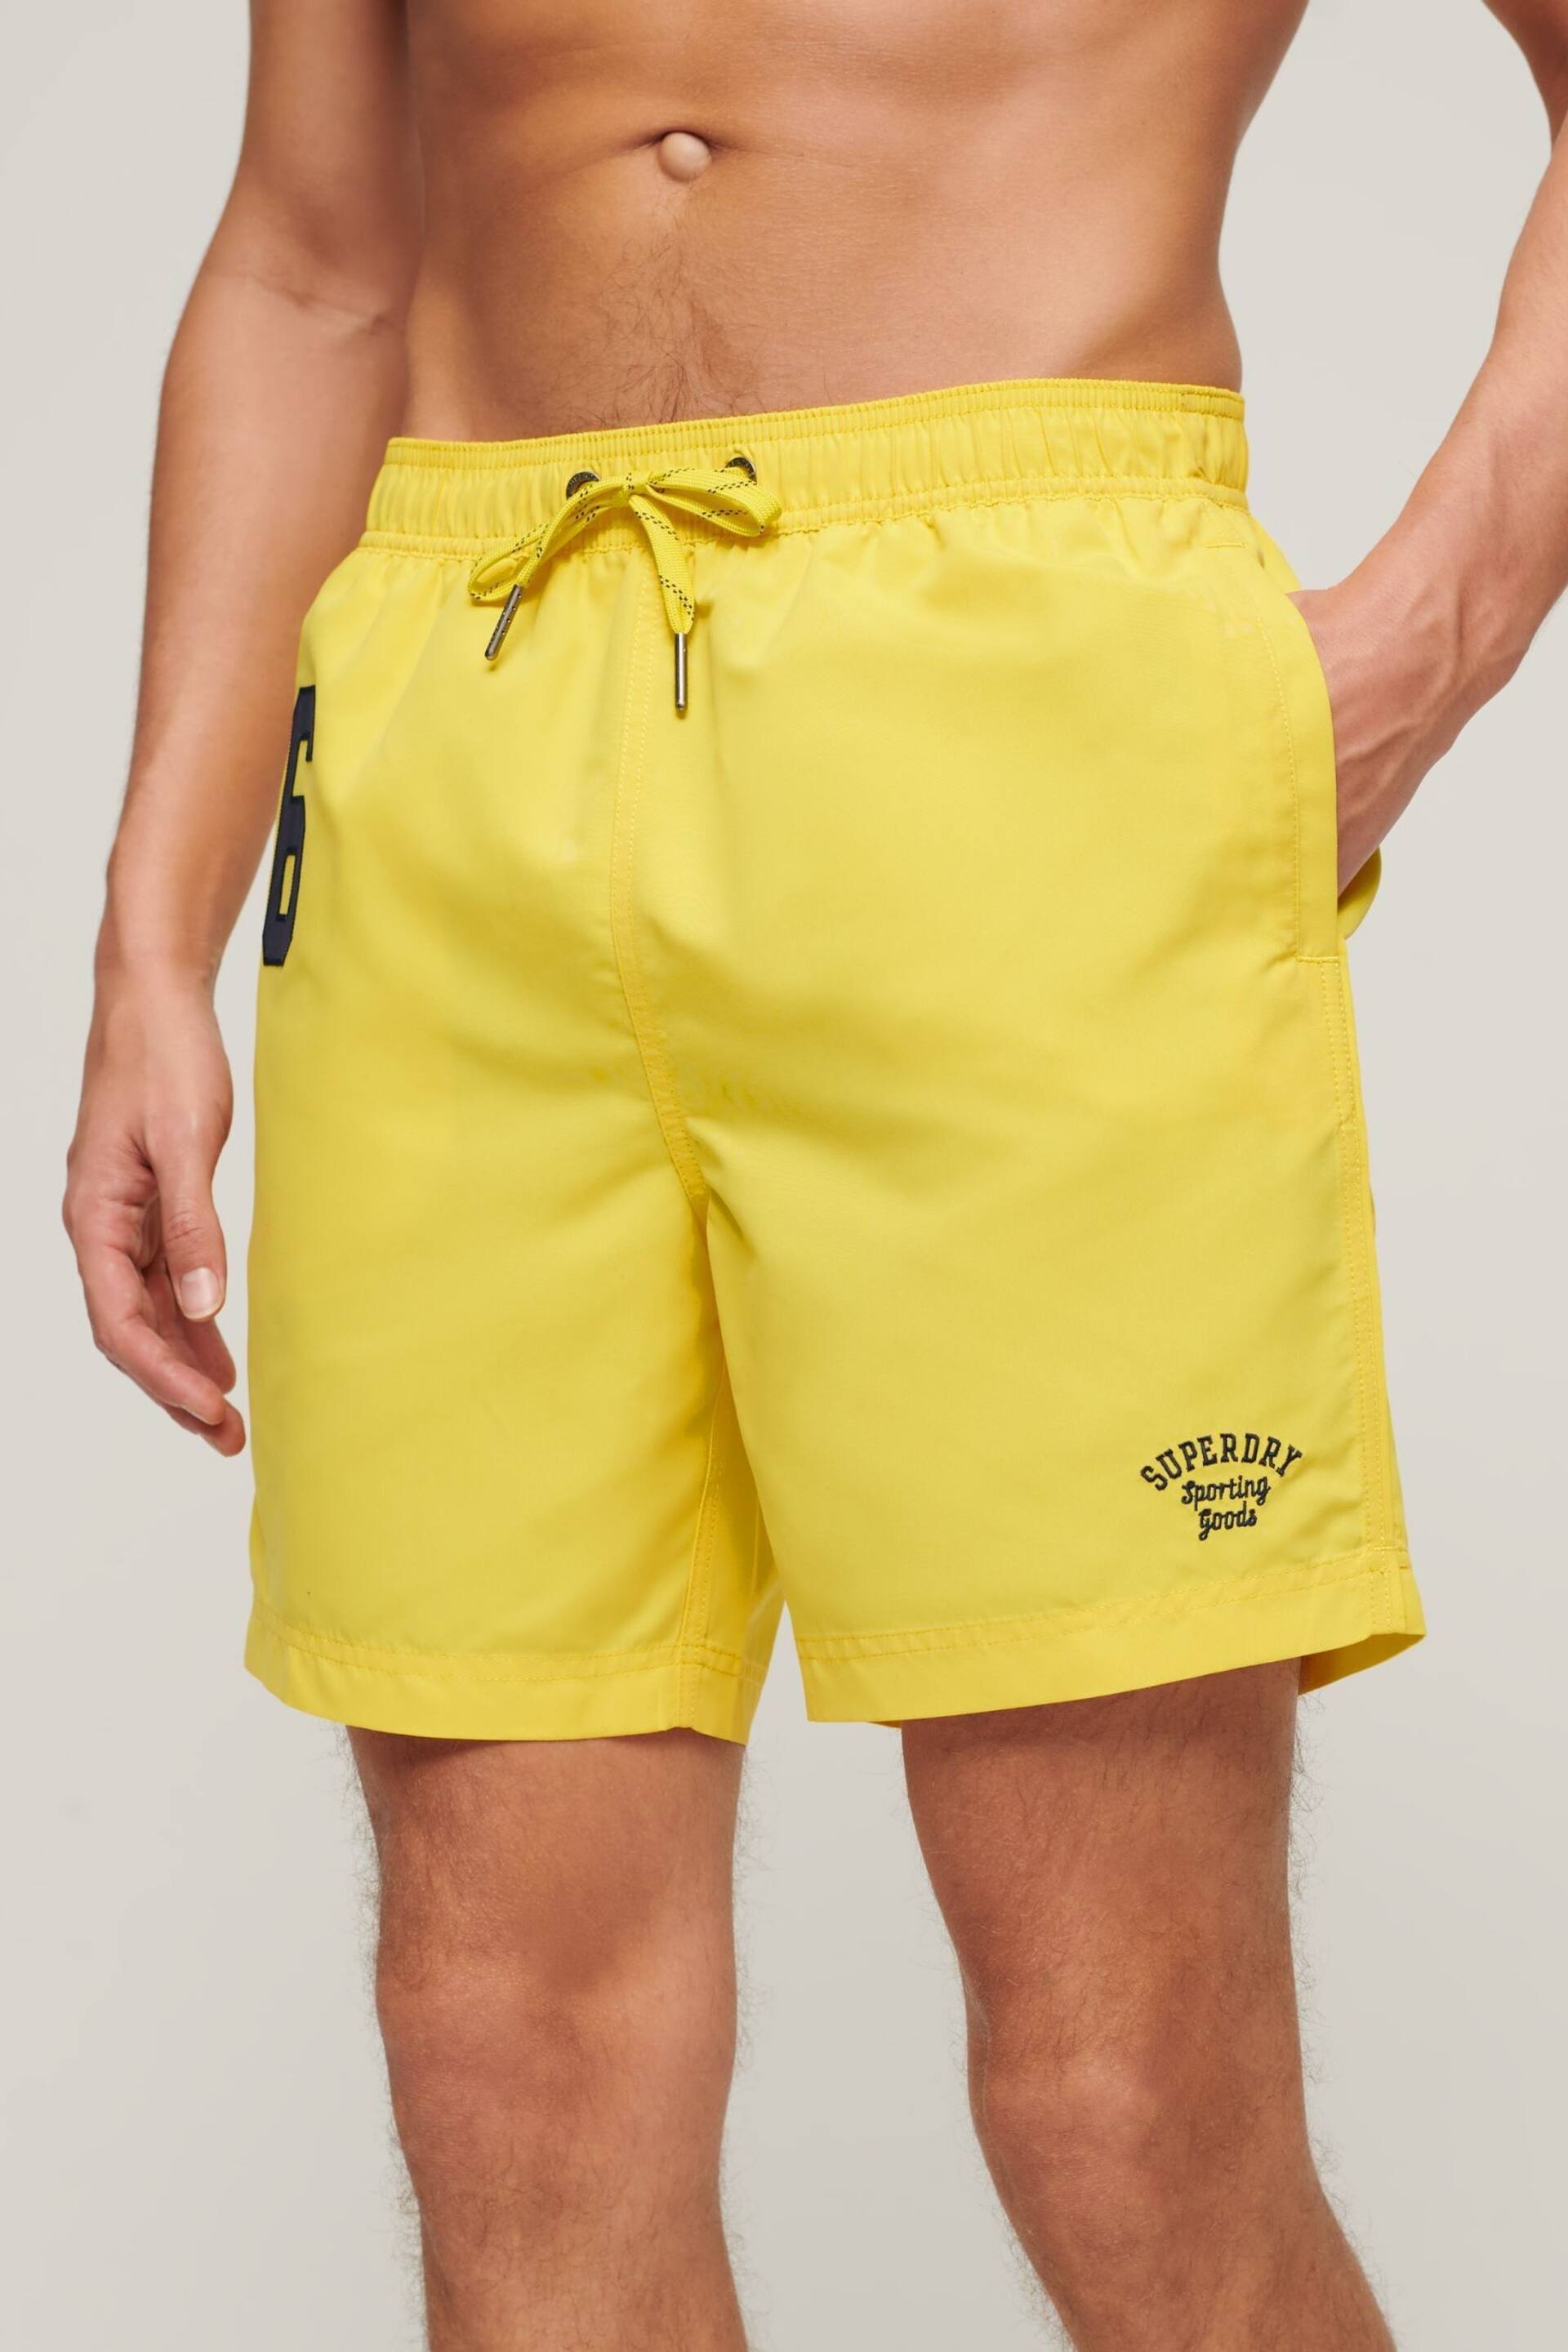 Superdry Yellow Recycled Polo 17 Inch Swim Shorts - Image 1 of 4